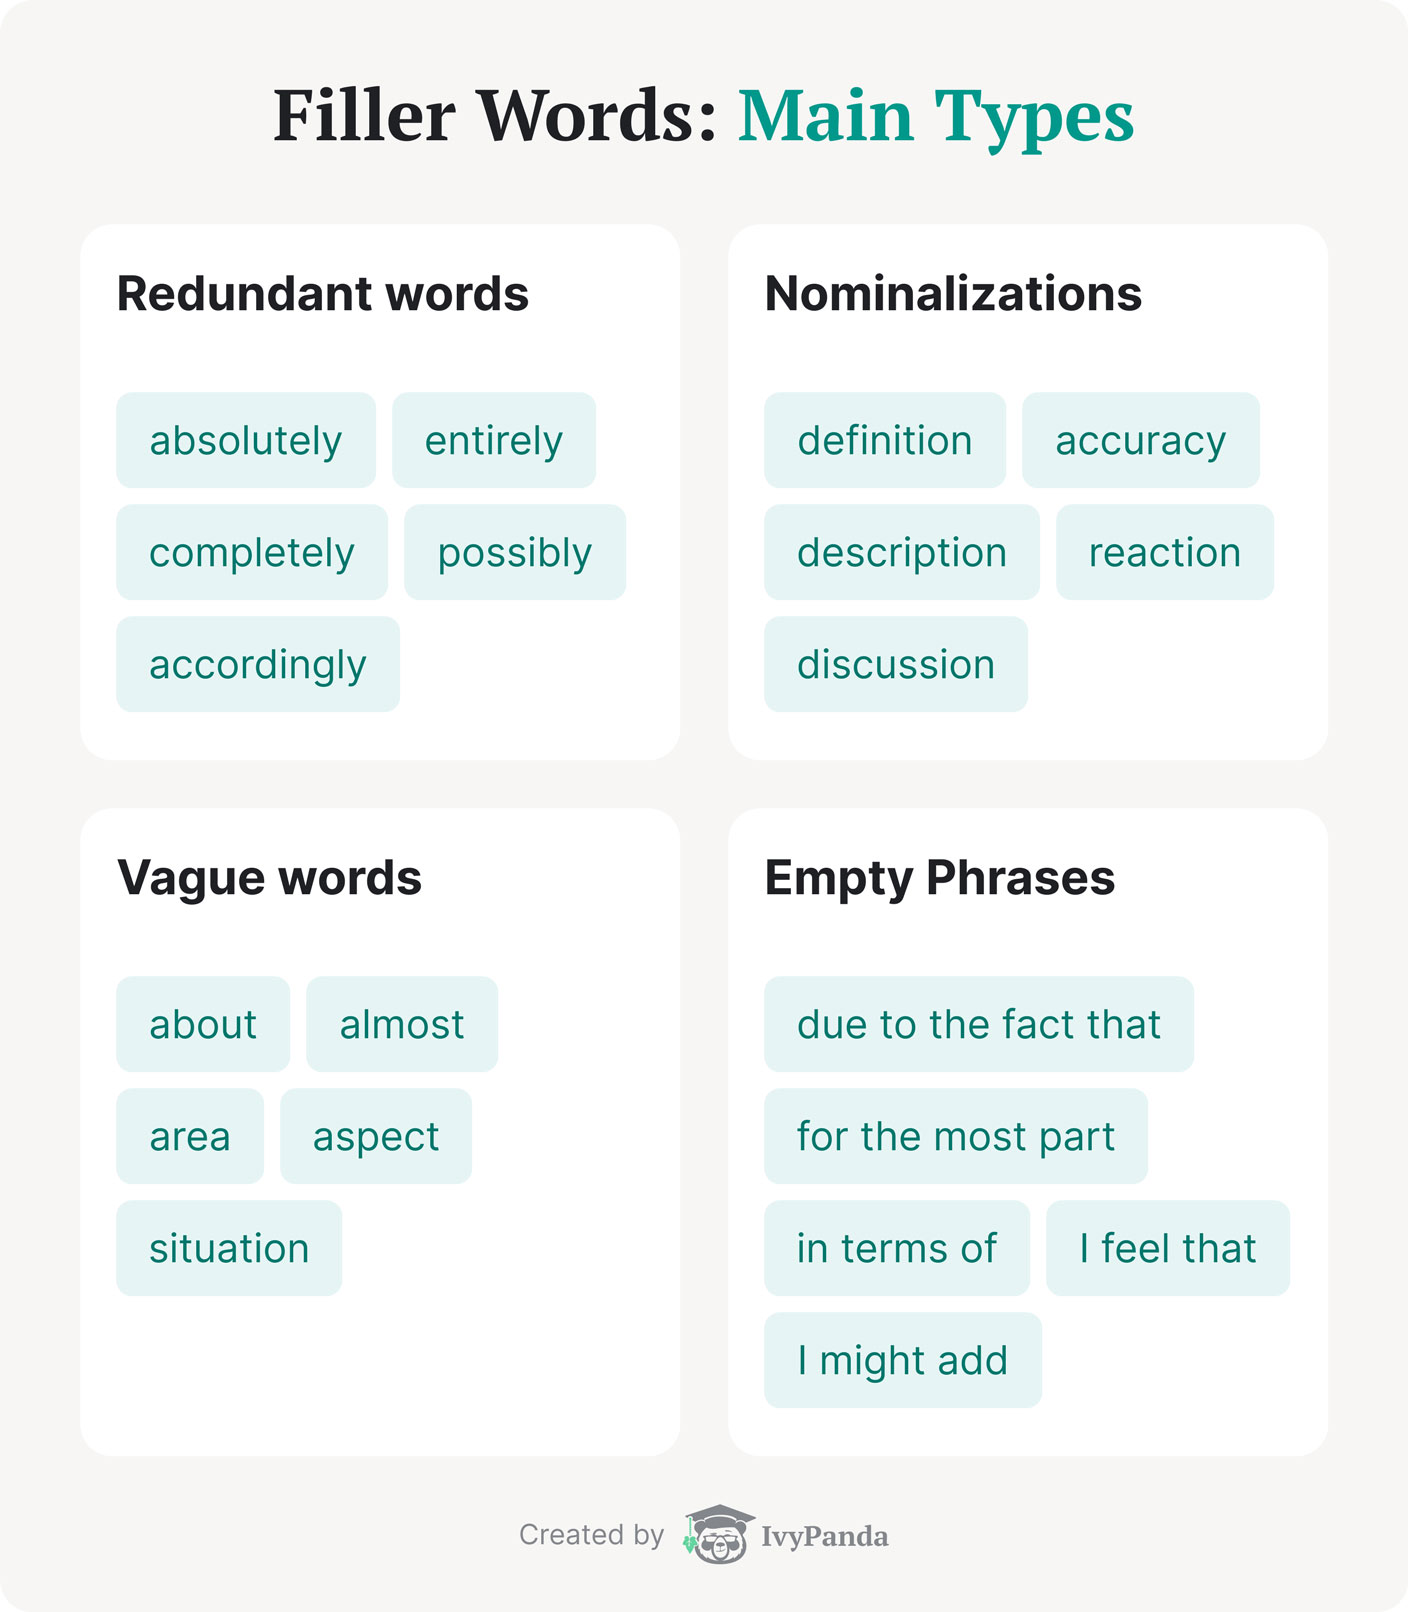 The 4 main types of filler words in writing are: redundant words, nominalizations, vague words, and empty phrases.